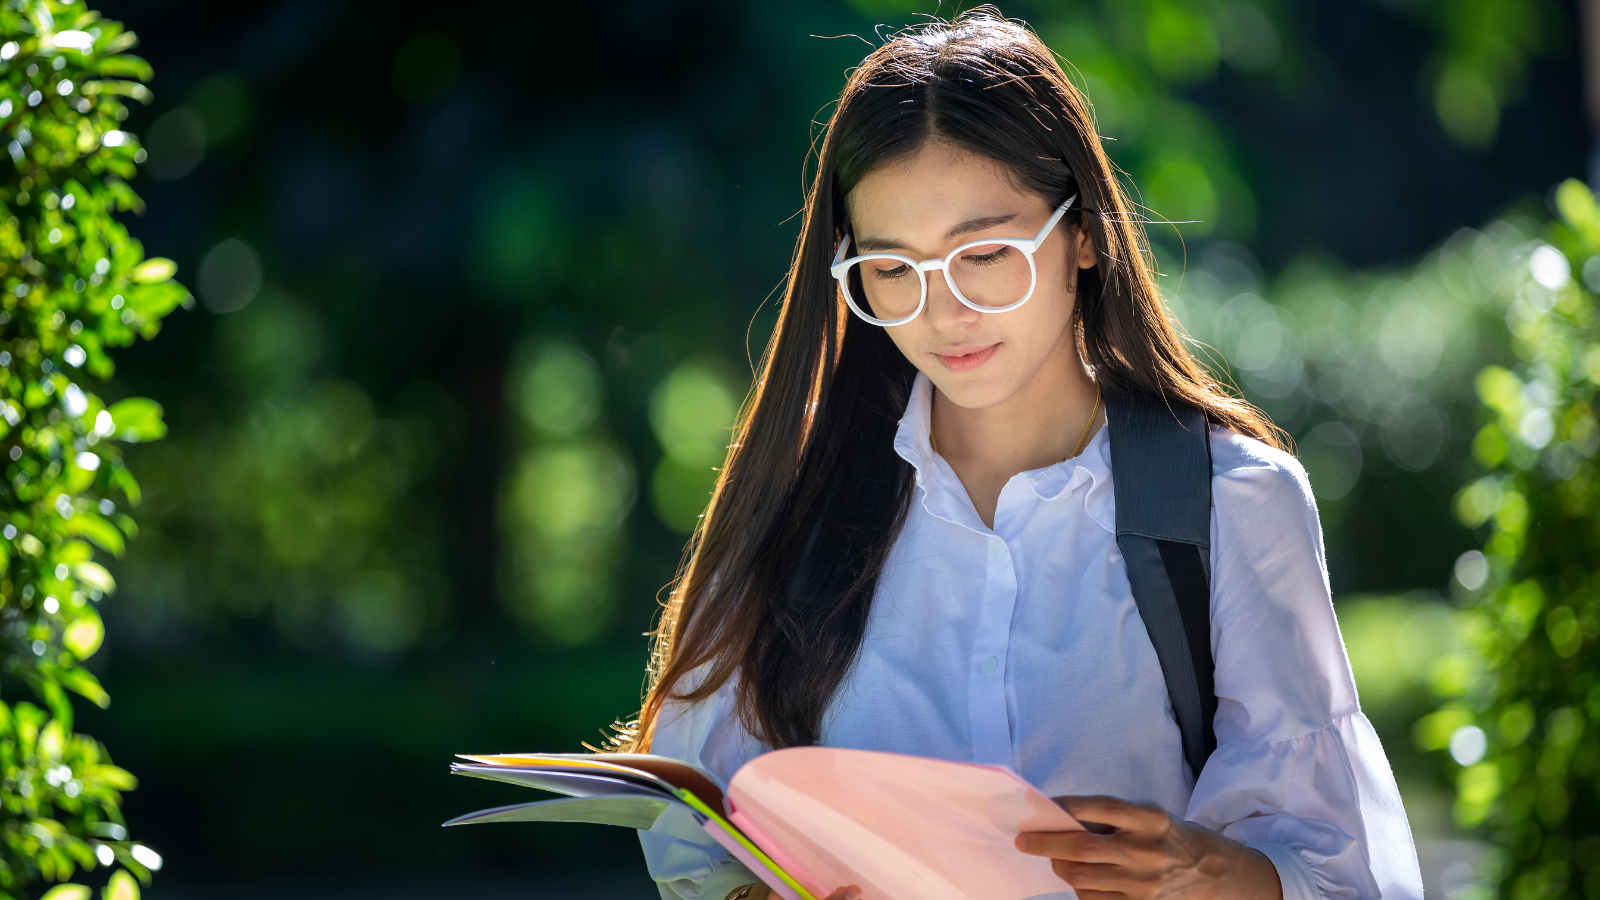 Teenage girl in glasses looking through her study notes.